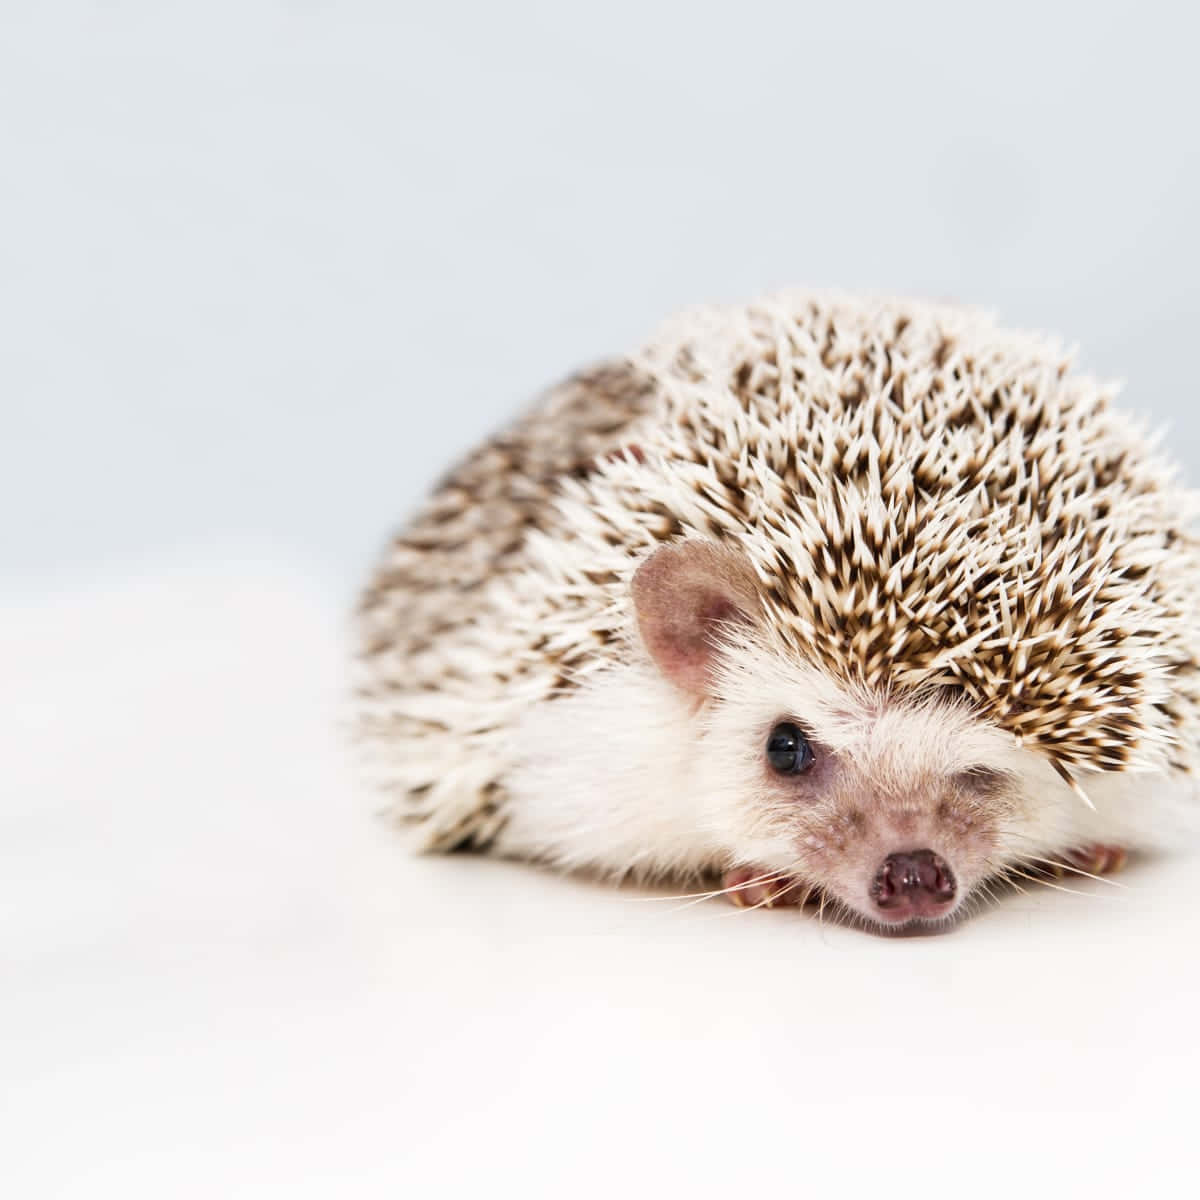 Cute Hedgehog On Gray Background Picture